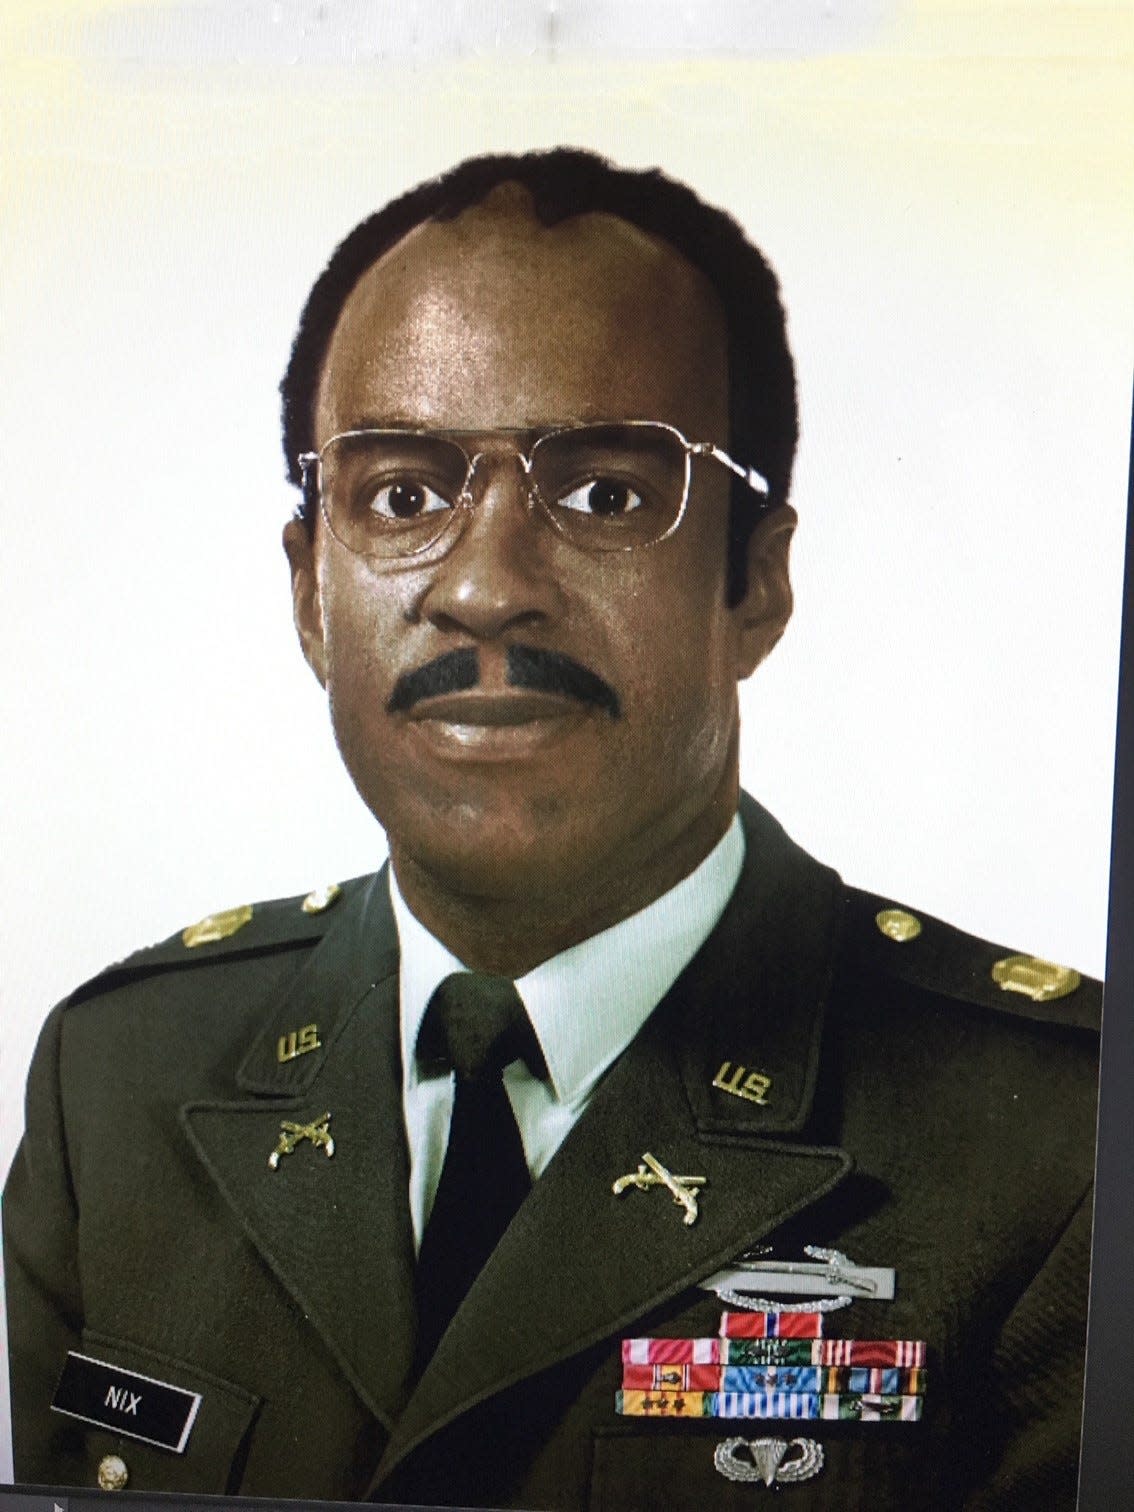 Before serving as the first Black warden of the Iowa State Penitentiary, Nix served in the U.S. Army.